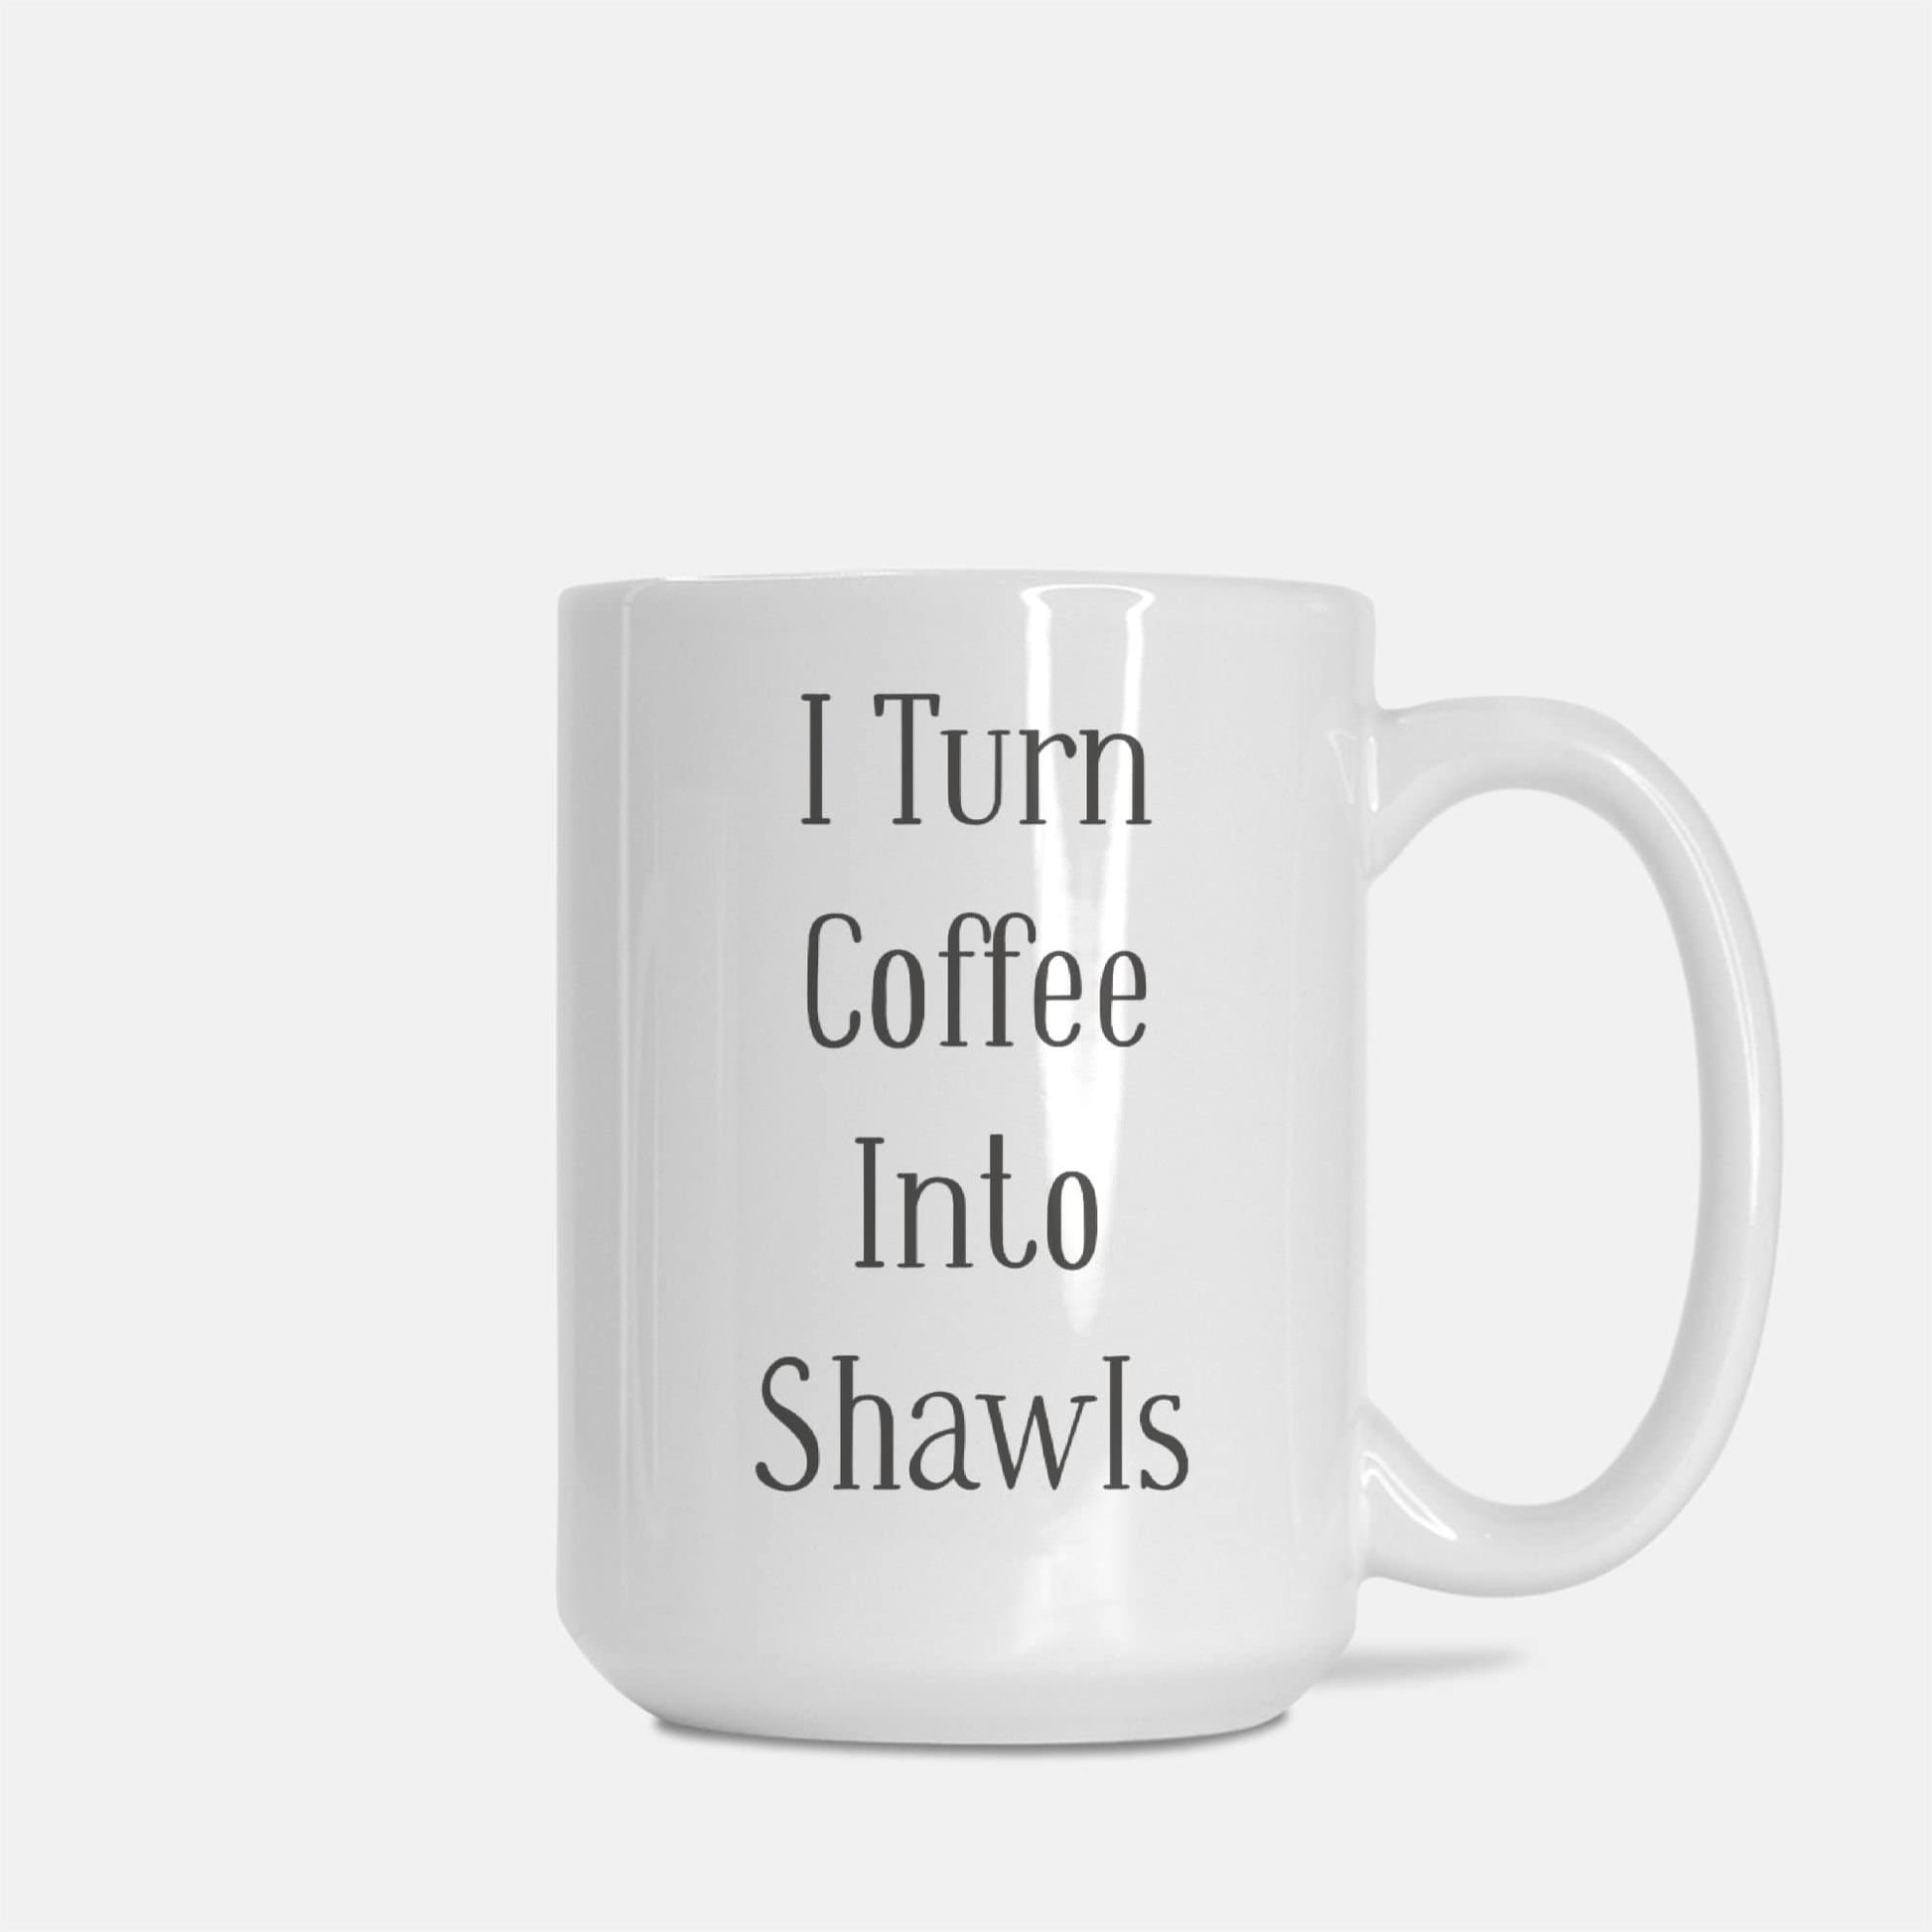 Funny Crafting Mug • I Turn Coffee Into Shawls • Gift Idea For Knitters